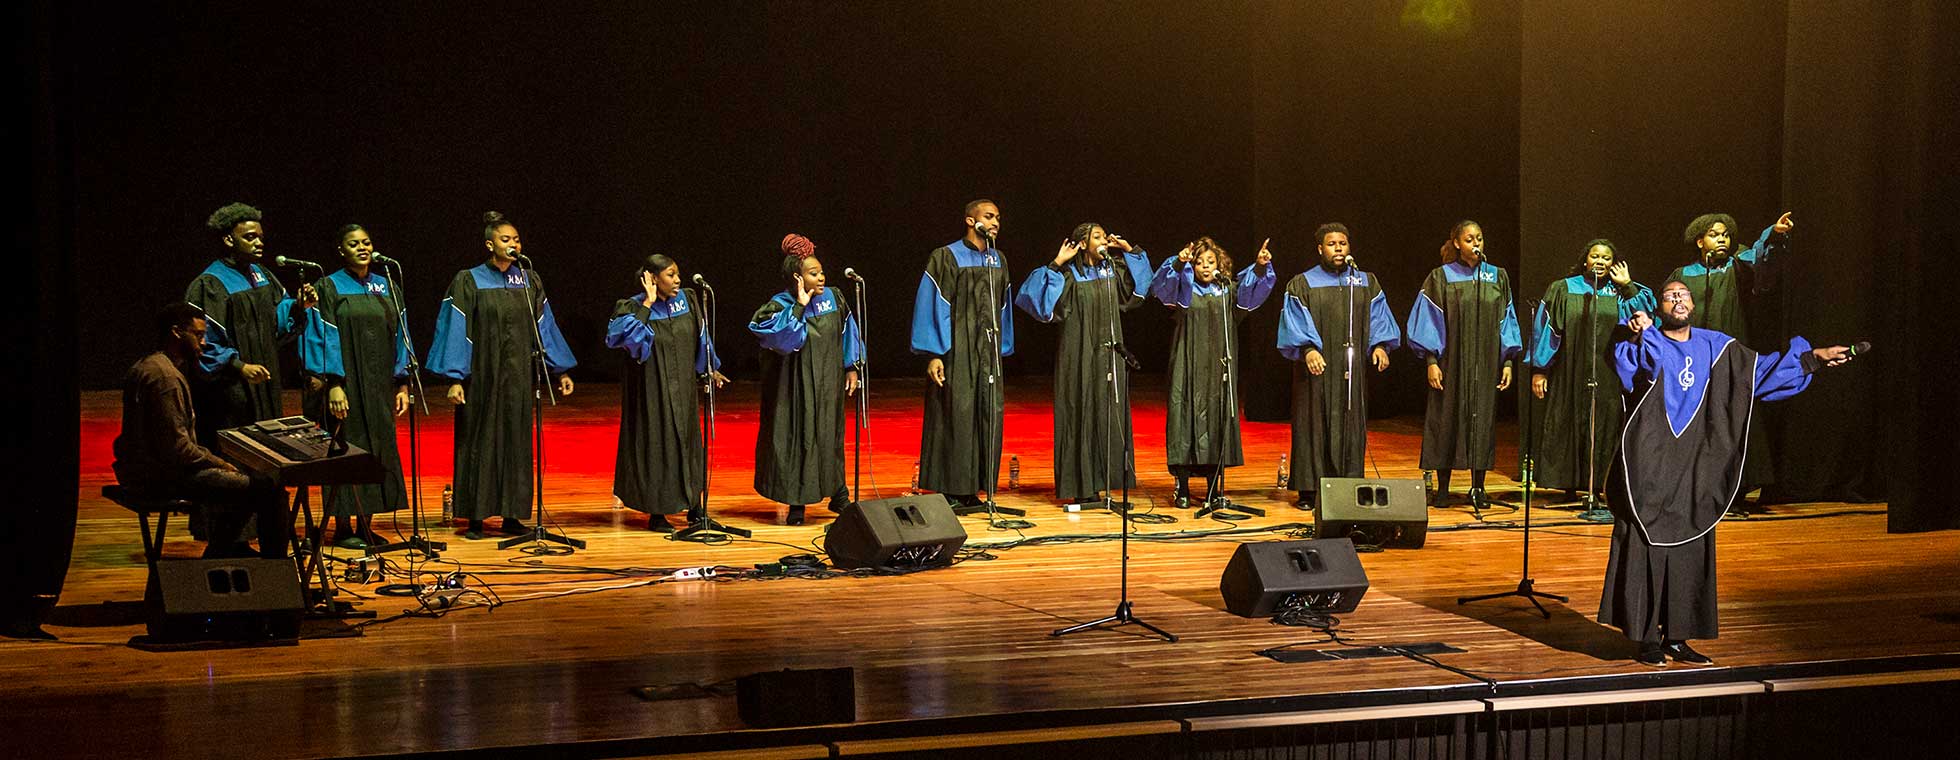 Twelve members of the Howard Gospel Choir perform on stage accompanied by a keyboardist and choir director. They all wear traditional gospel choir robes.